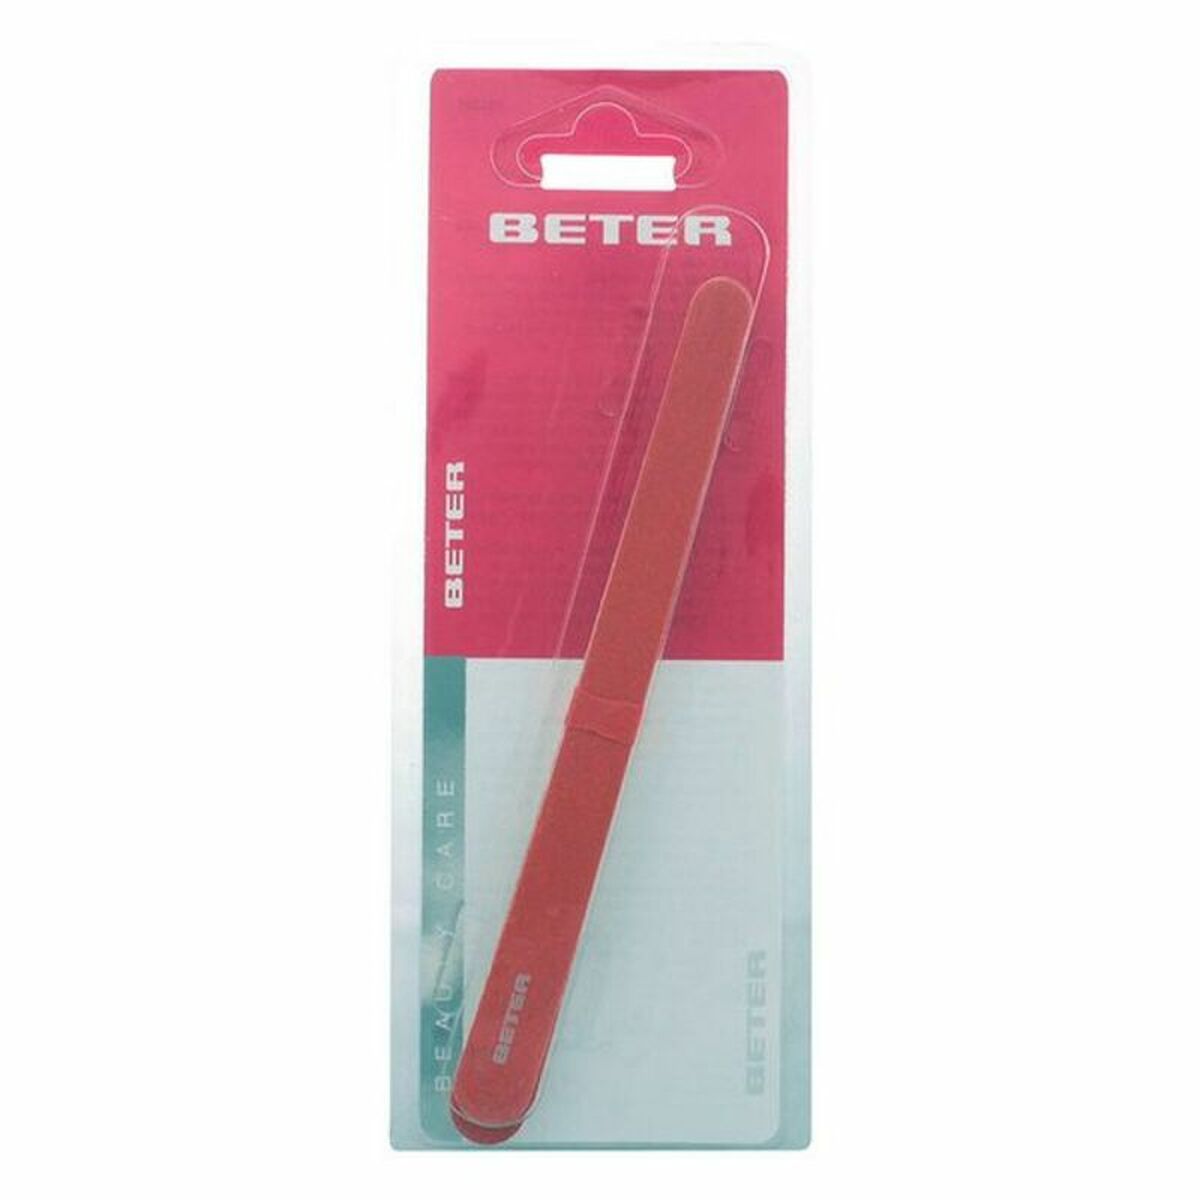 Nail file Beter Lima 4 Pieces - Calm Beauty IE